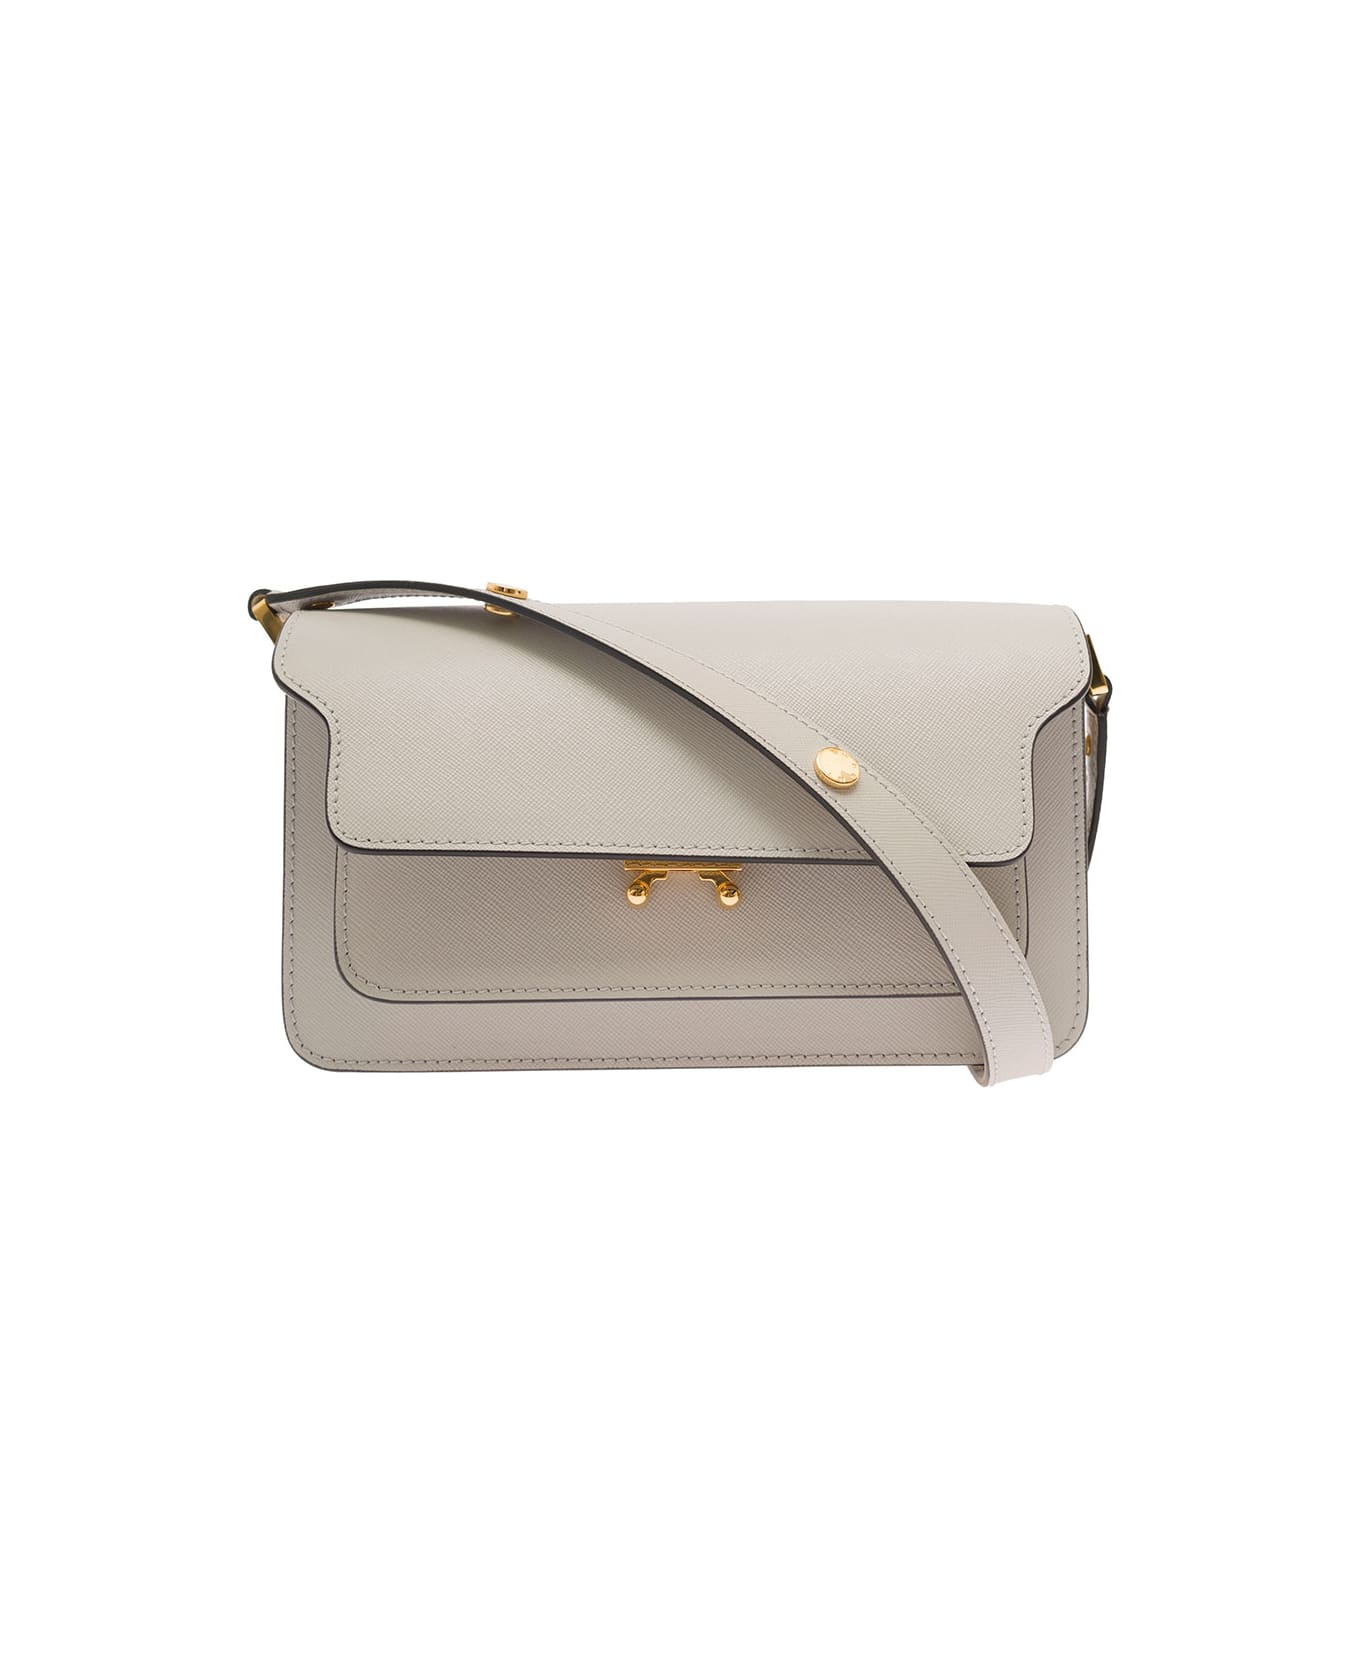 Marni 'trunk' White Shoulder Bag With Push-lock Fastening In Leather Woman - White ショルダーバッグ